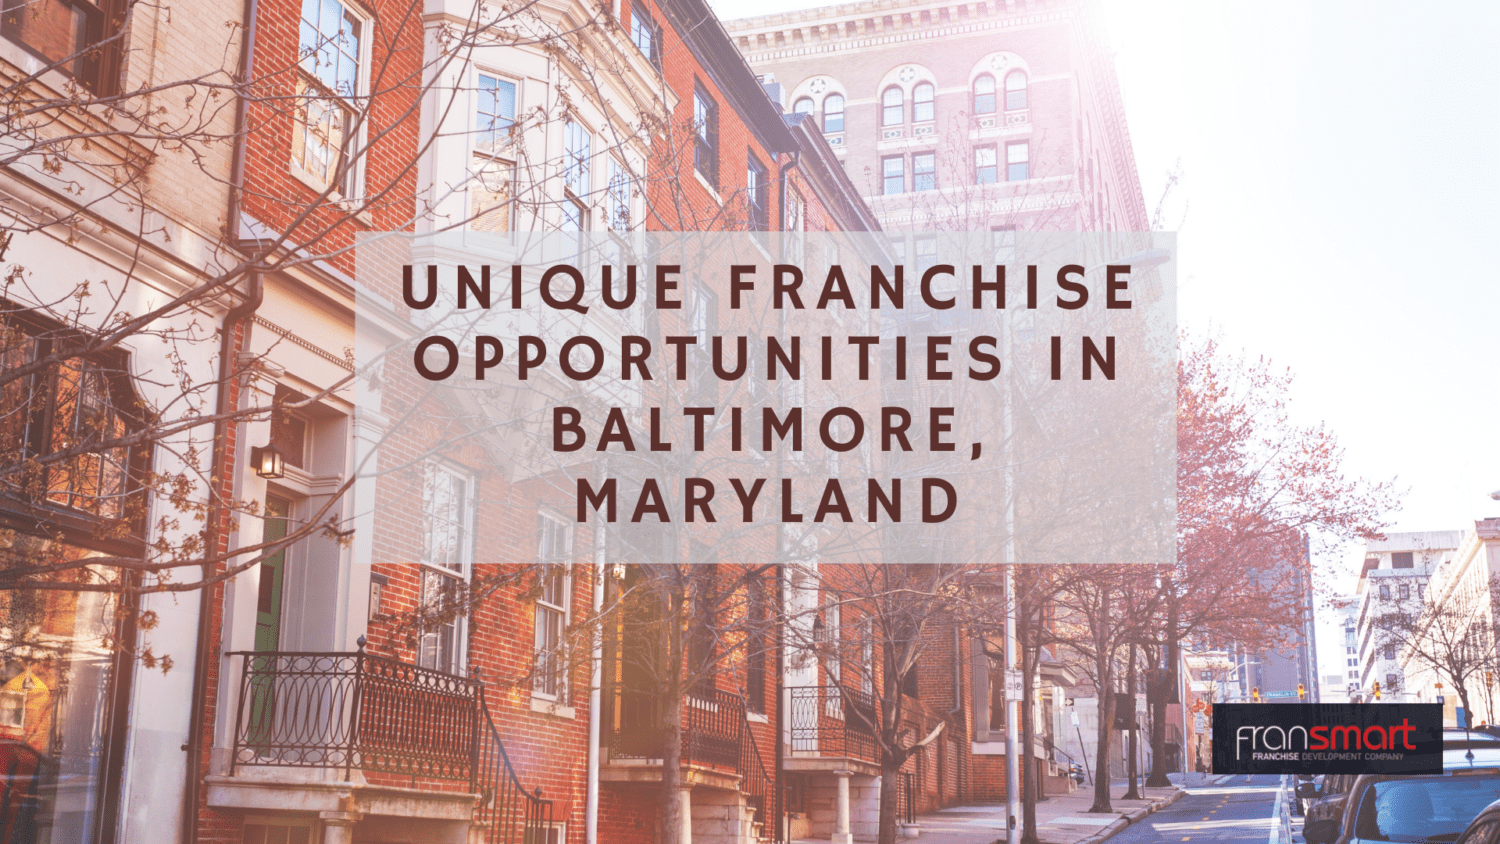 Unique Franchise Opportunities in Baltimore, Maryland